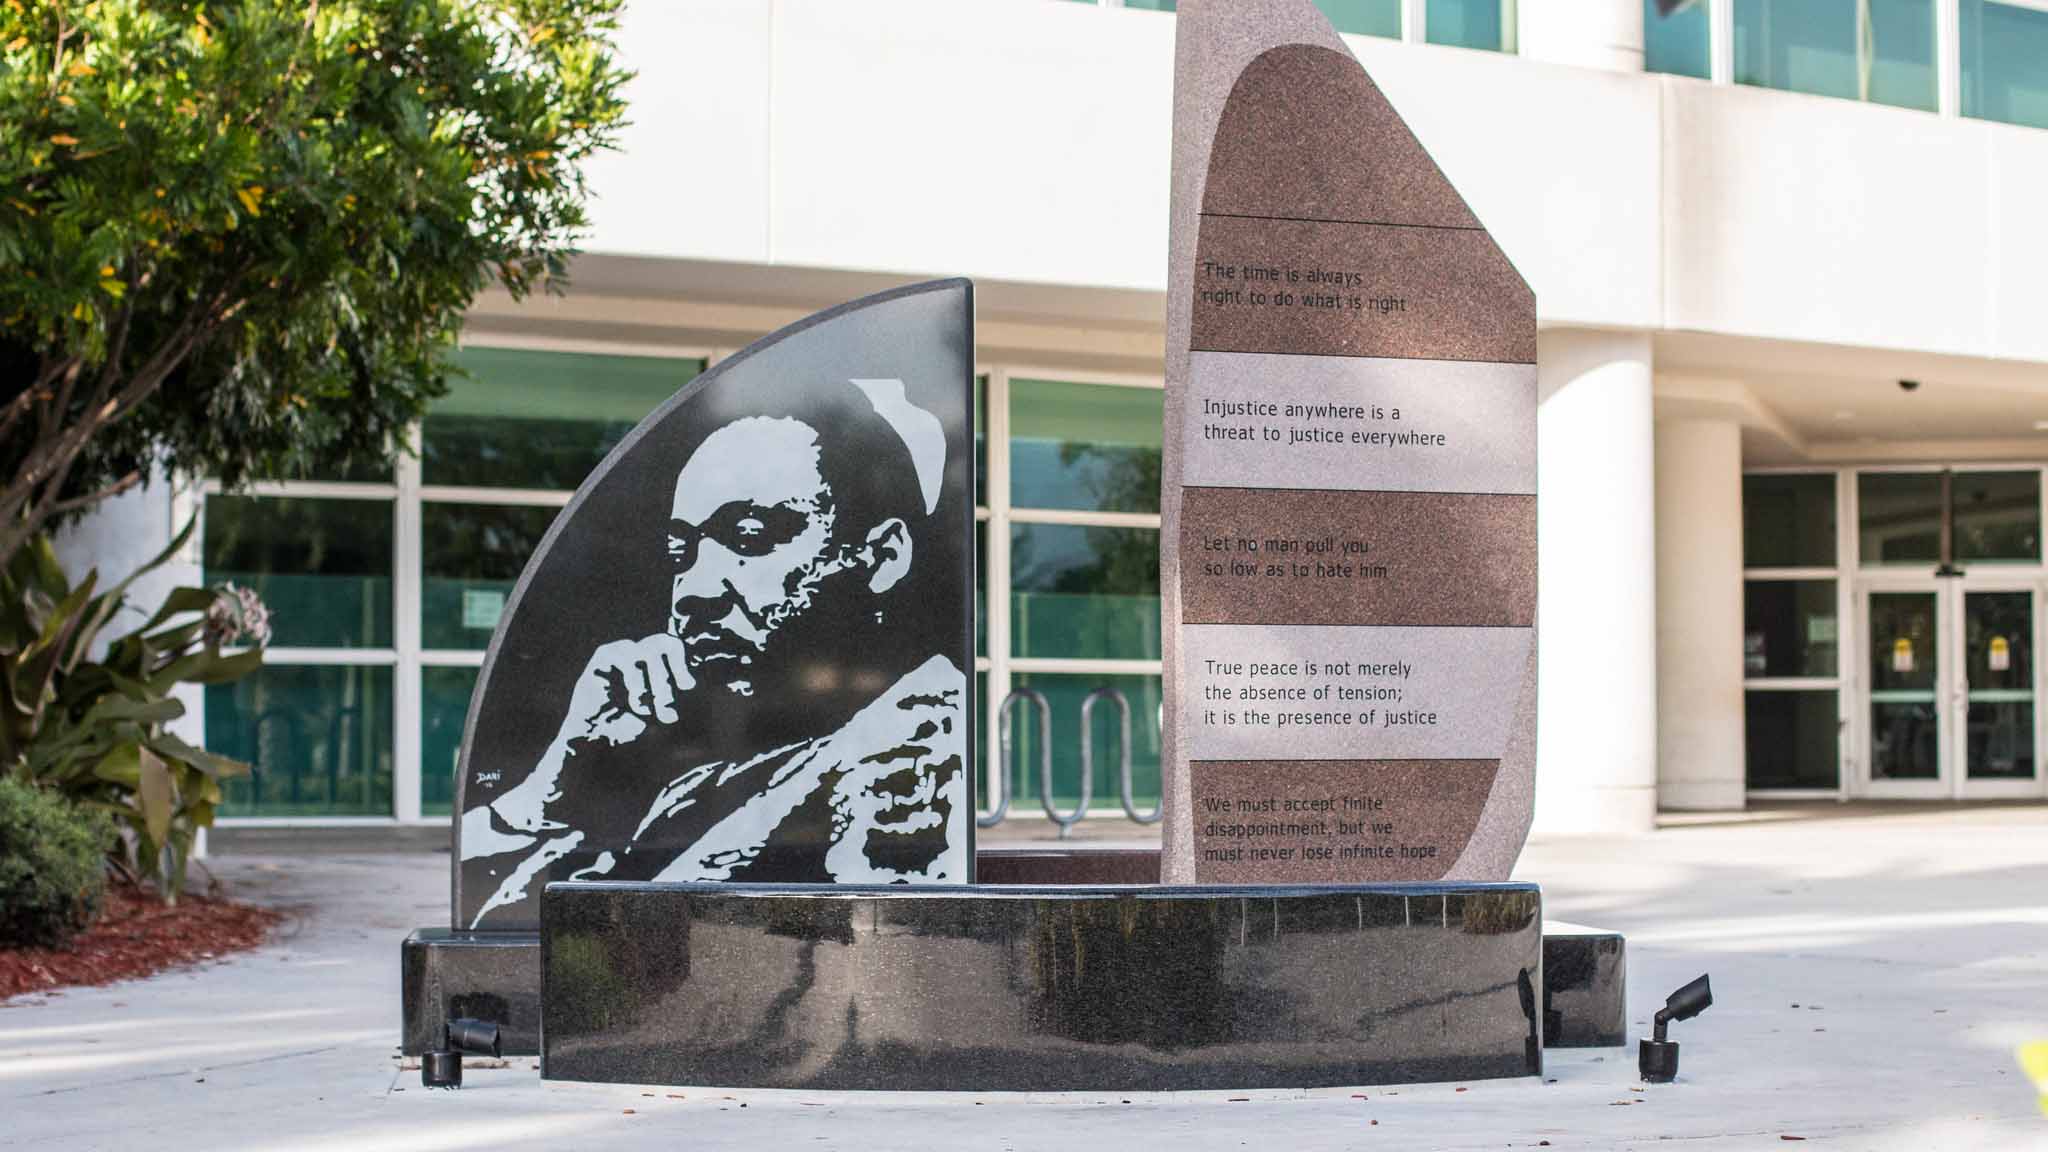 The Coral Springs MLK Jr. Committee Is Accepting Nominations For The 2023 MLK Monument Award